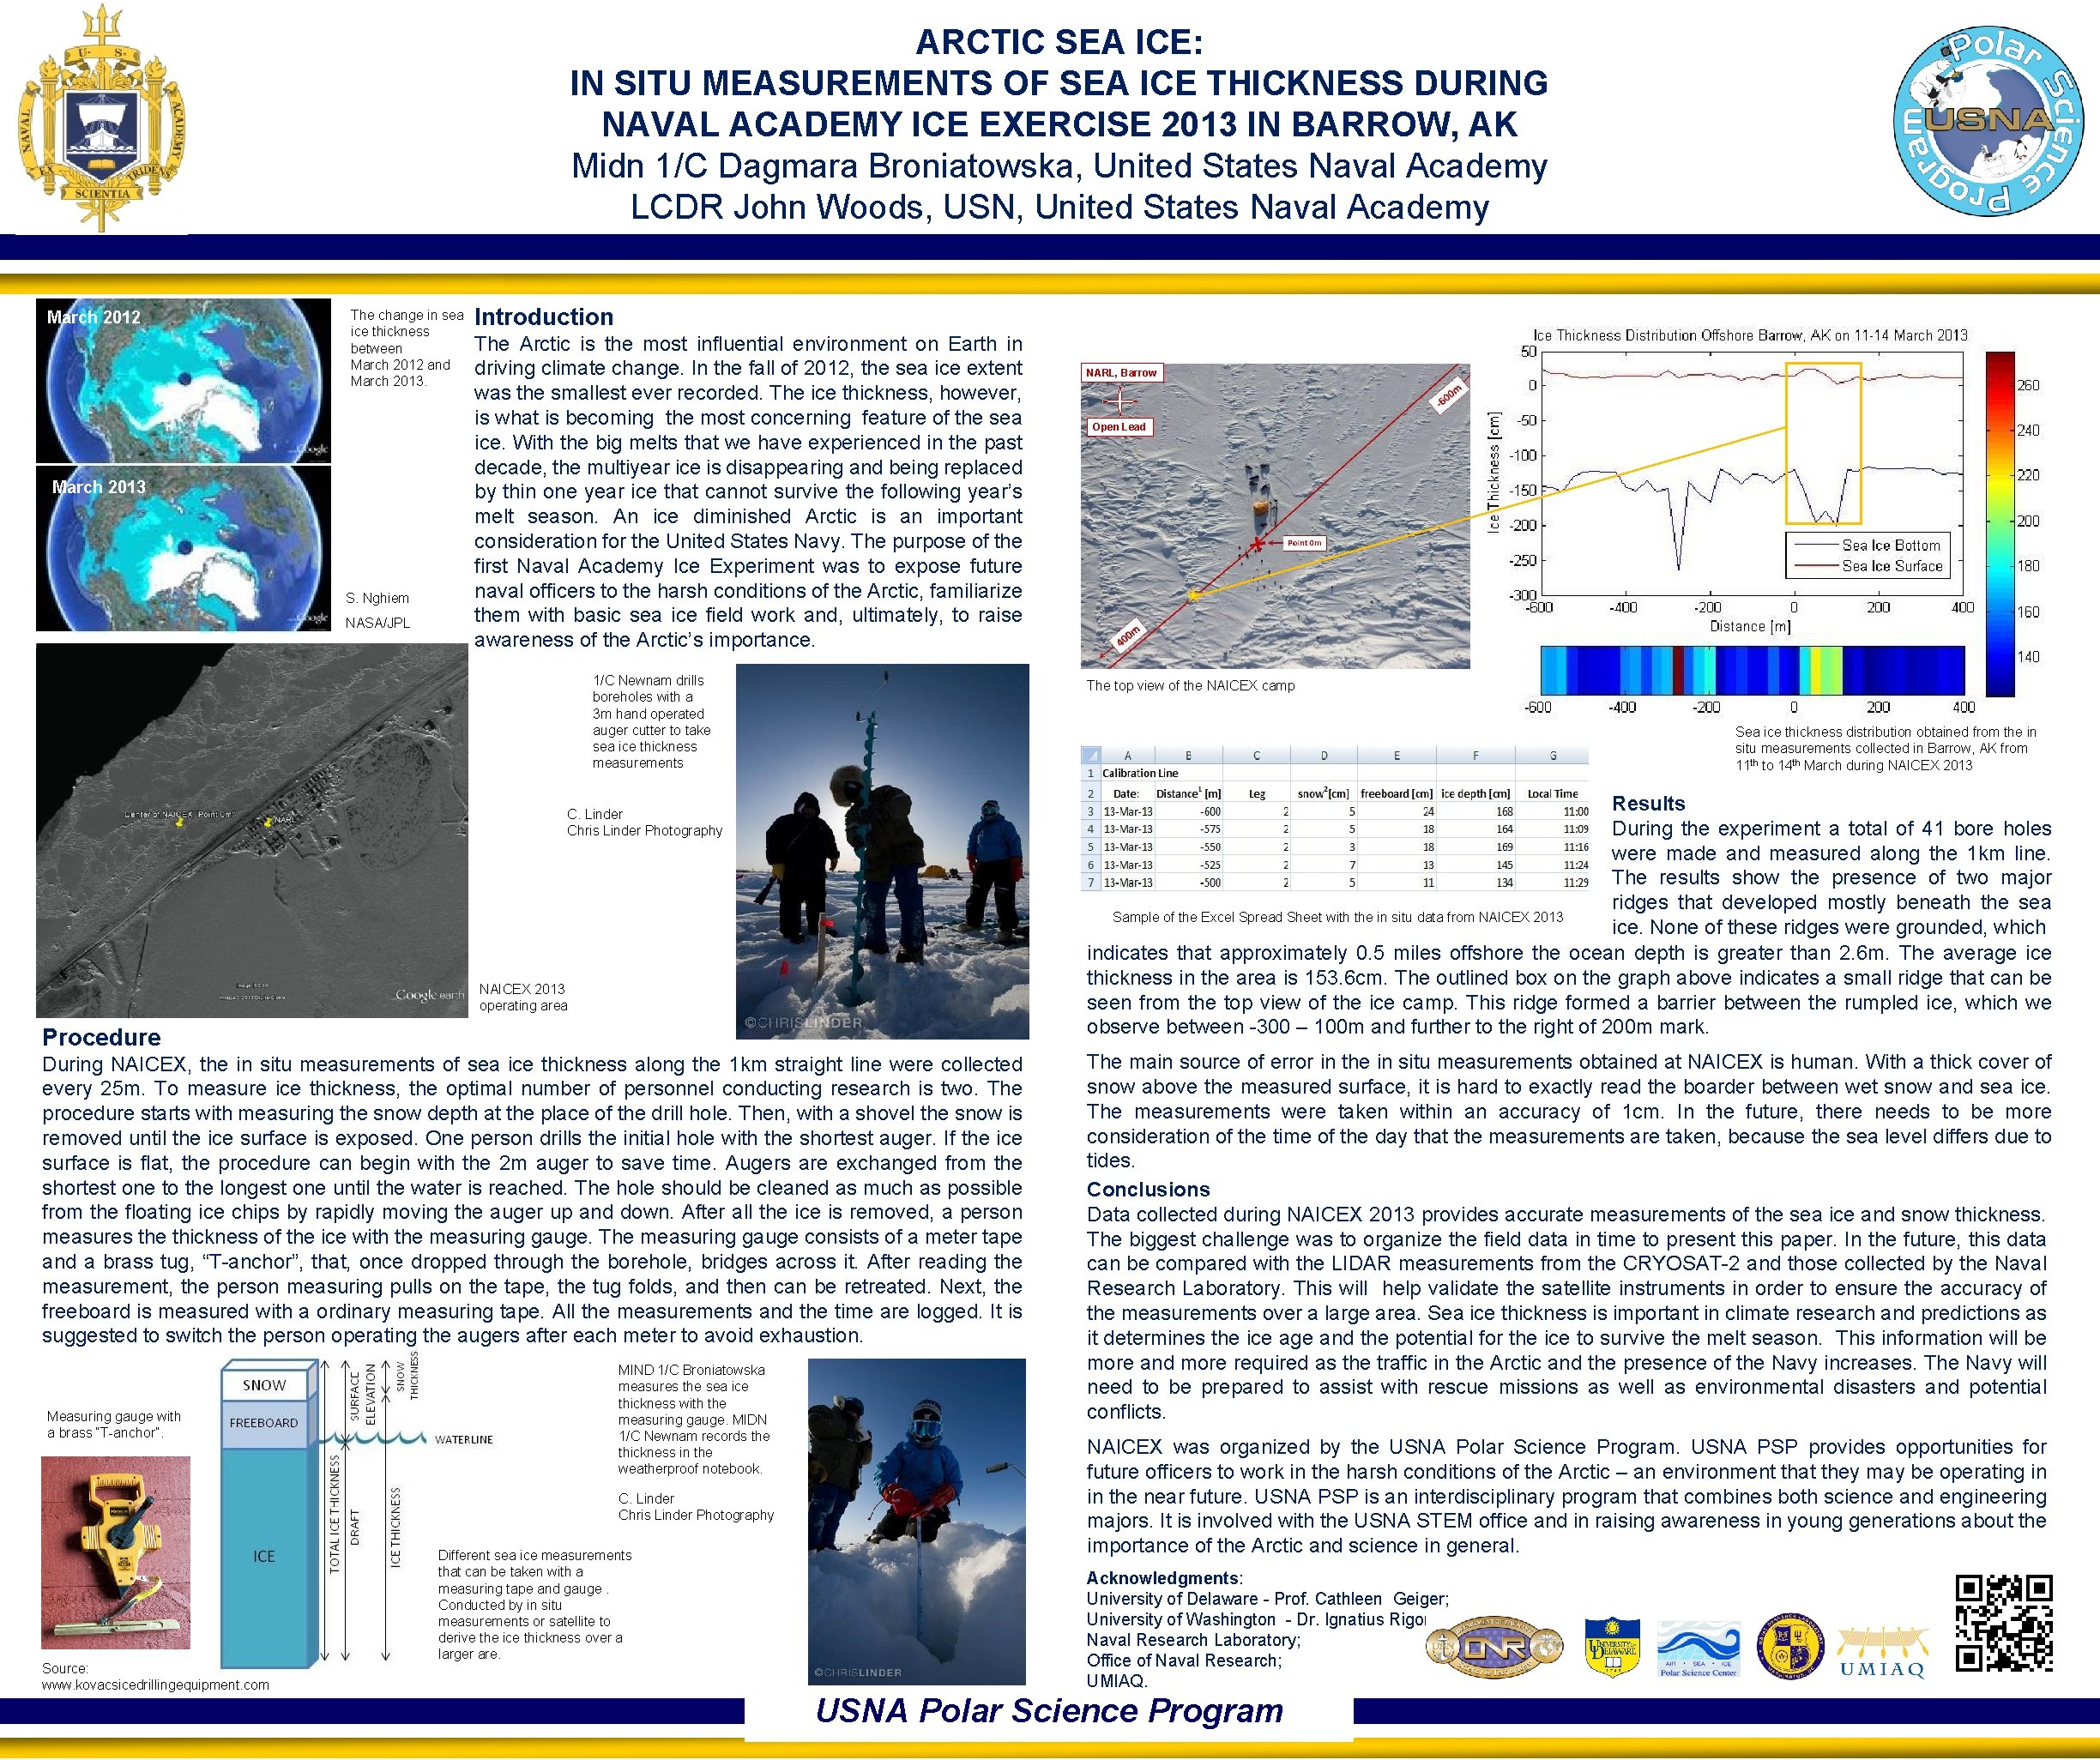 ARCTIC SEA ICE: IN SITU MEASUREMENTS OF SEA ICE THICKNESS DURING NAVAL ACADEMY ICE